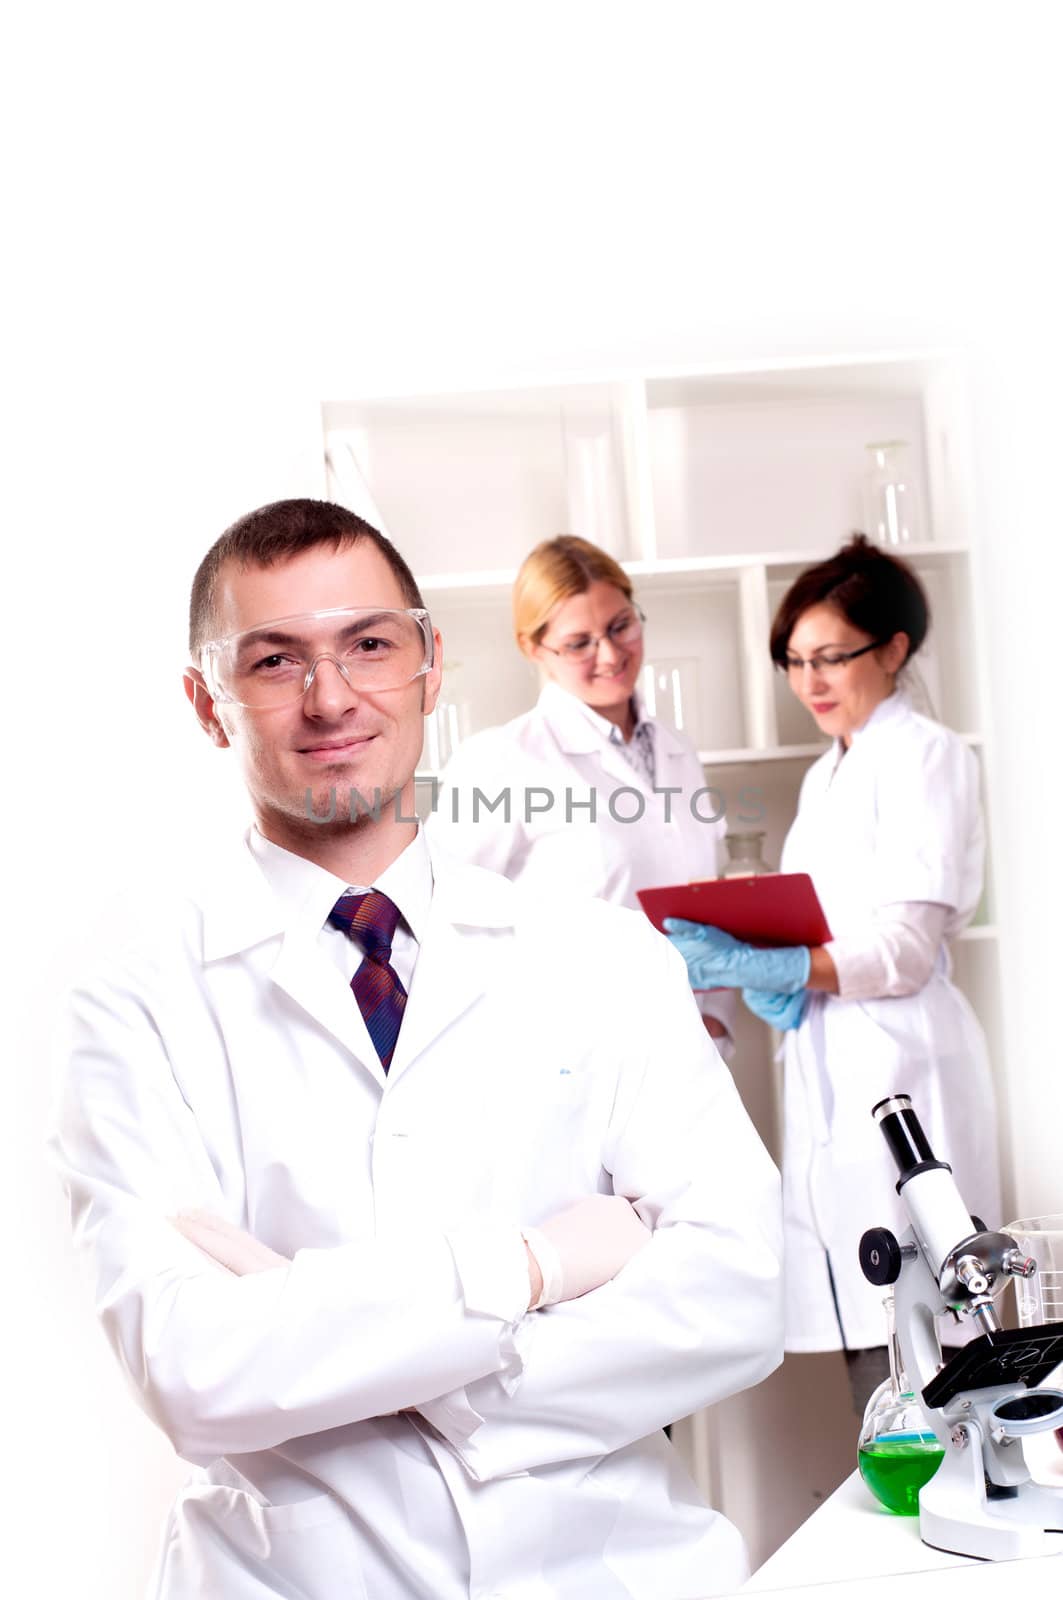 Three doctors are smiling at the camera in a doctors' office. Horizontally framed shot.